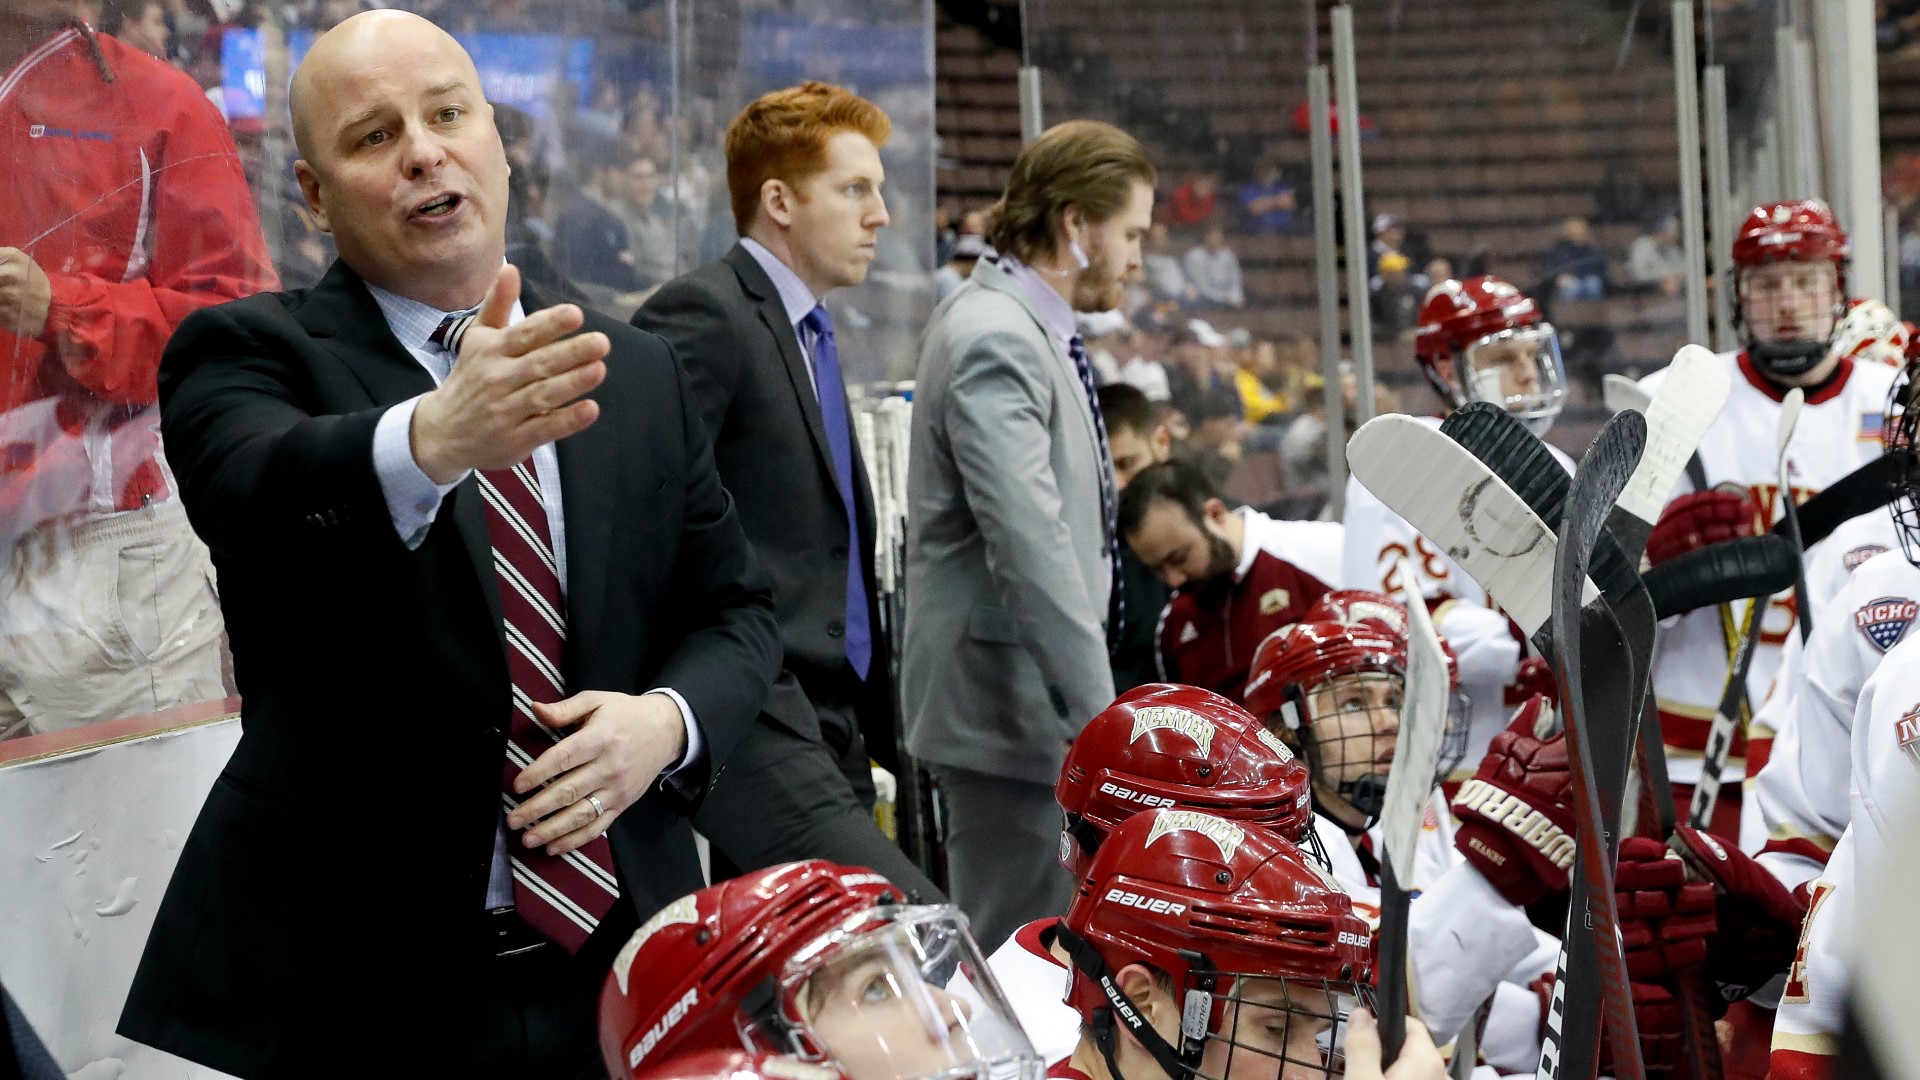 Jim Montgomery, the former head coach of the Denver Pioneers, has led the Boston Bruins to a record-setting campaign.